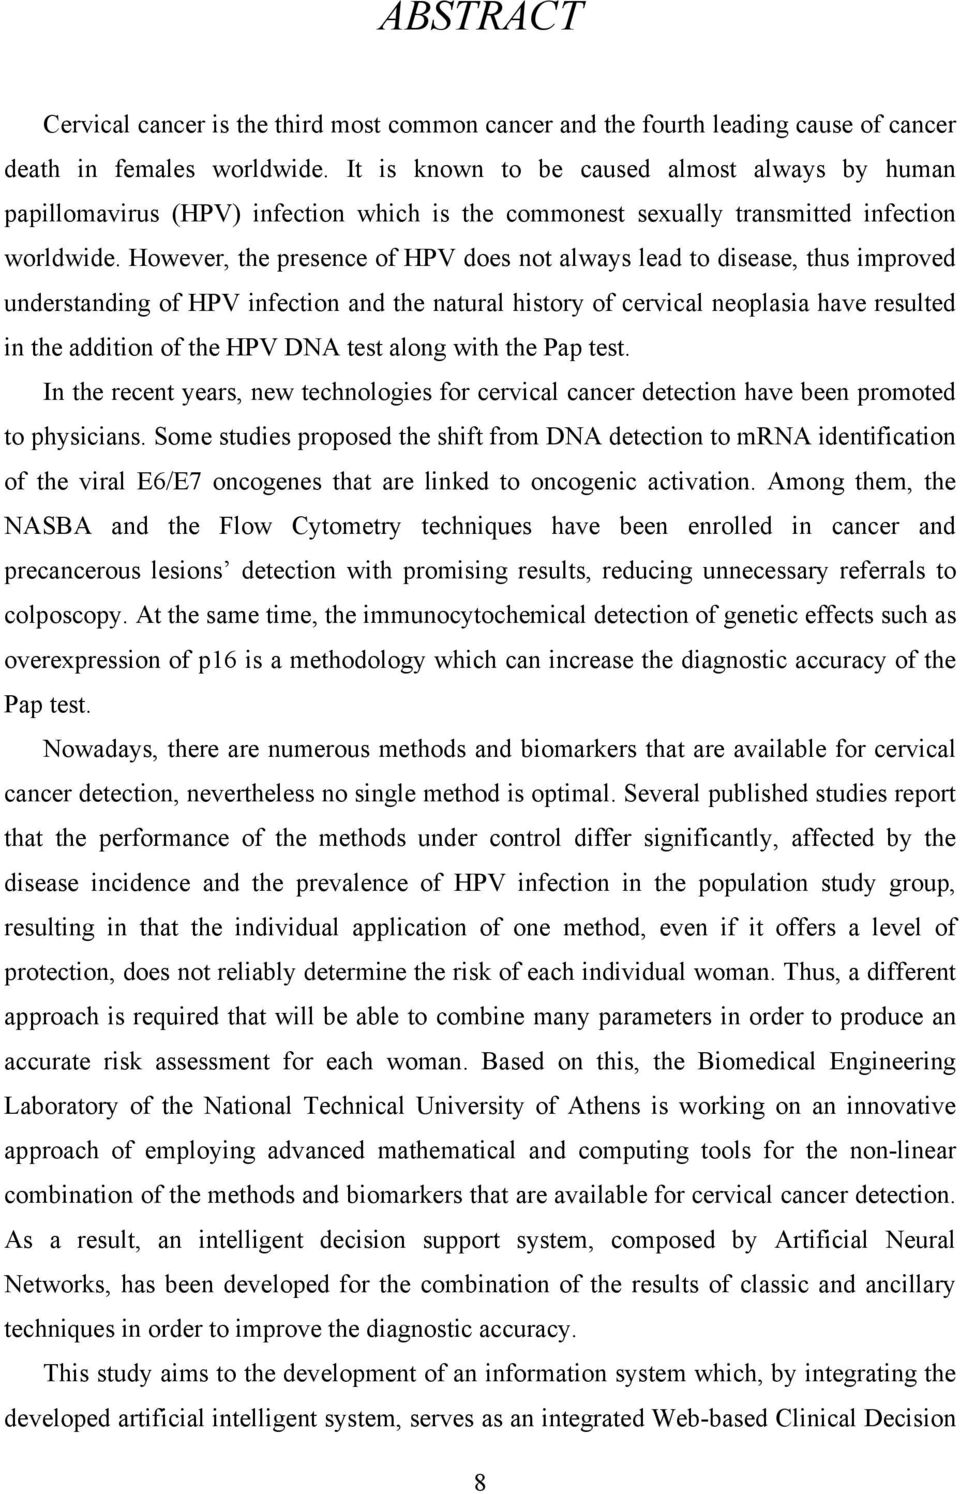 However, the presence of HPV does not always lead to disease, thus improved understanding of HPV infection and the natural history of cervical neoplasia have resulted in the addition of the HPV DNA